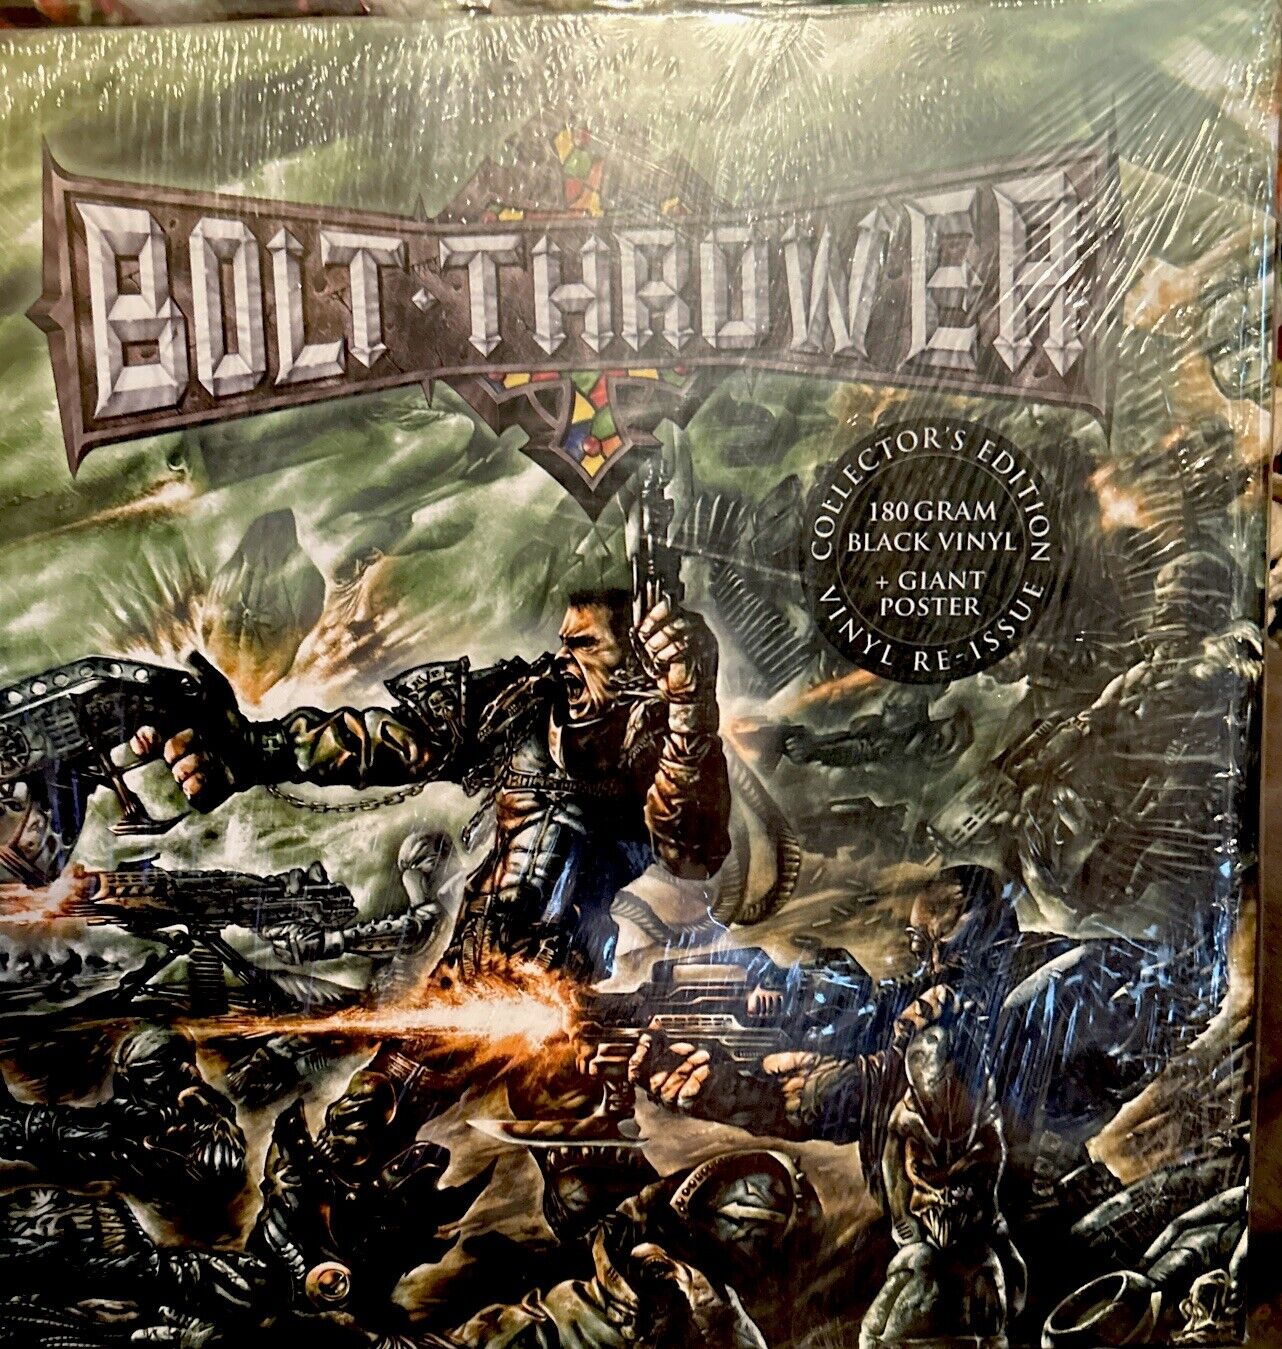 Honour Valour Pride by Bolt Thrower (Record, 2012) Double Vinyl  👀 👇